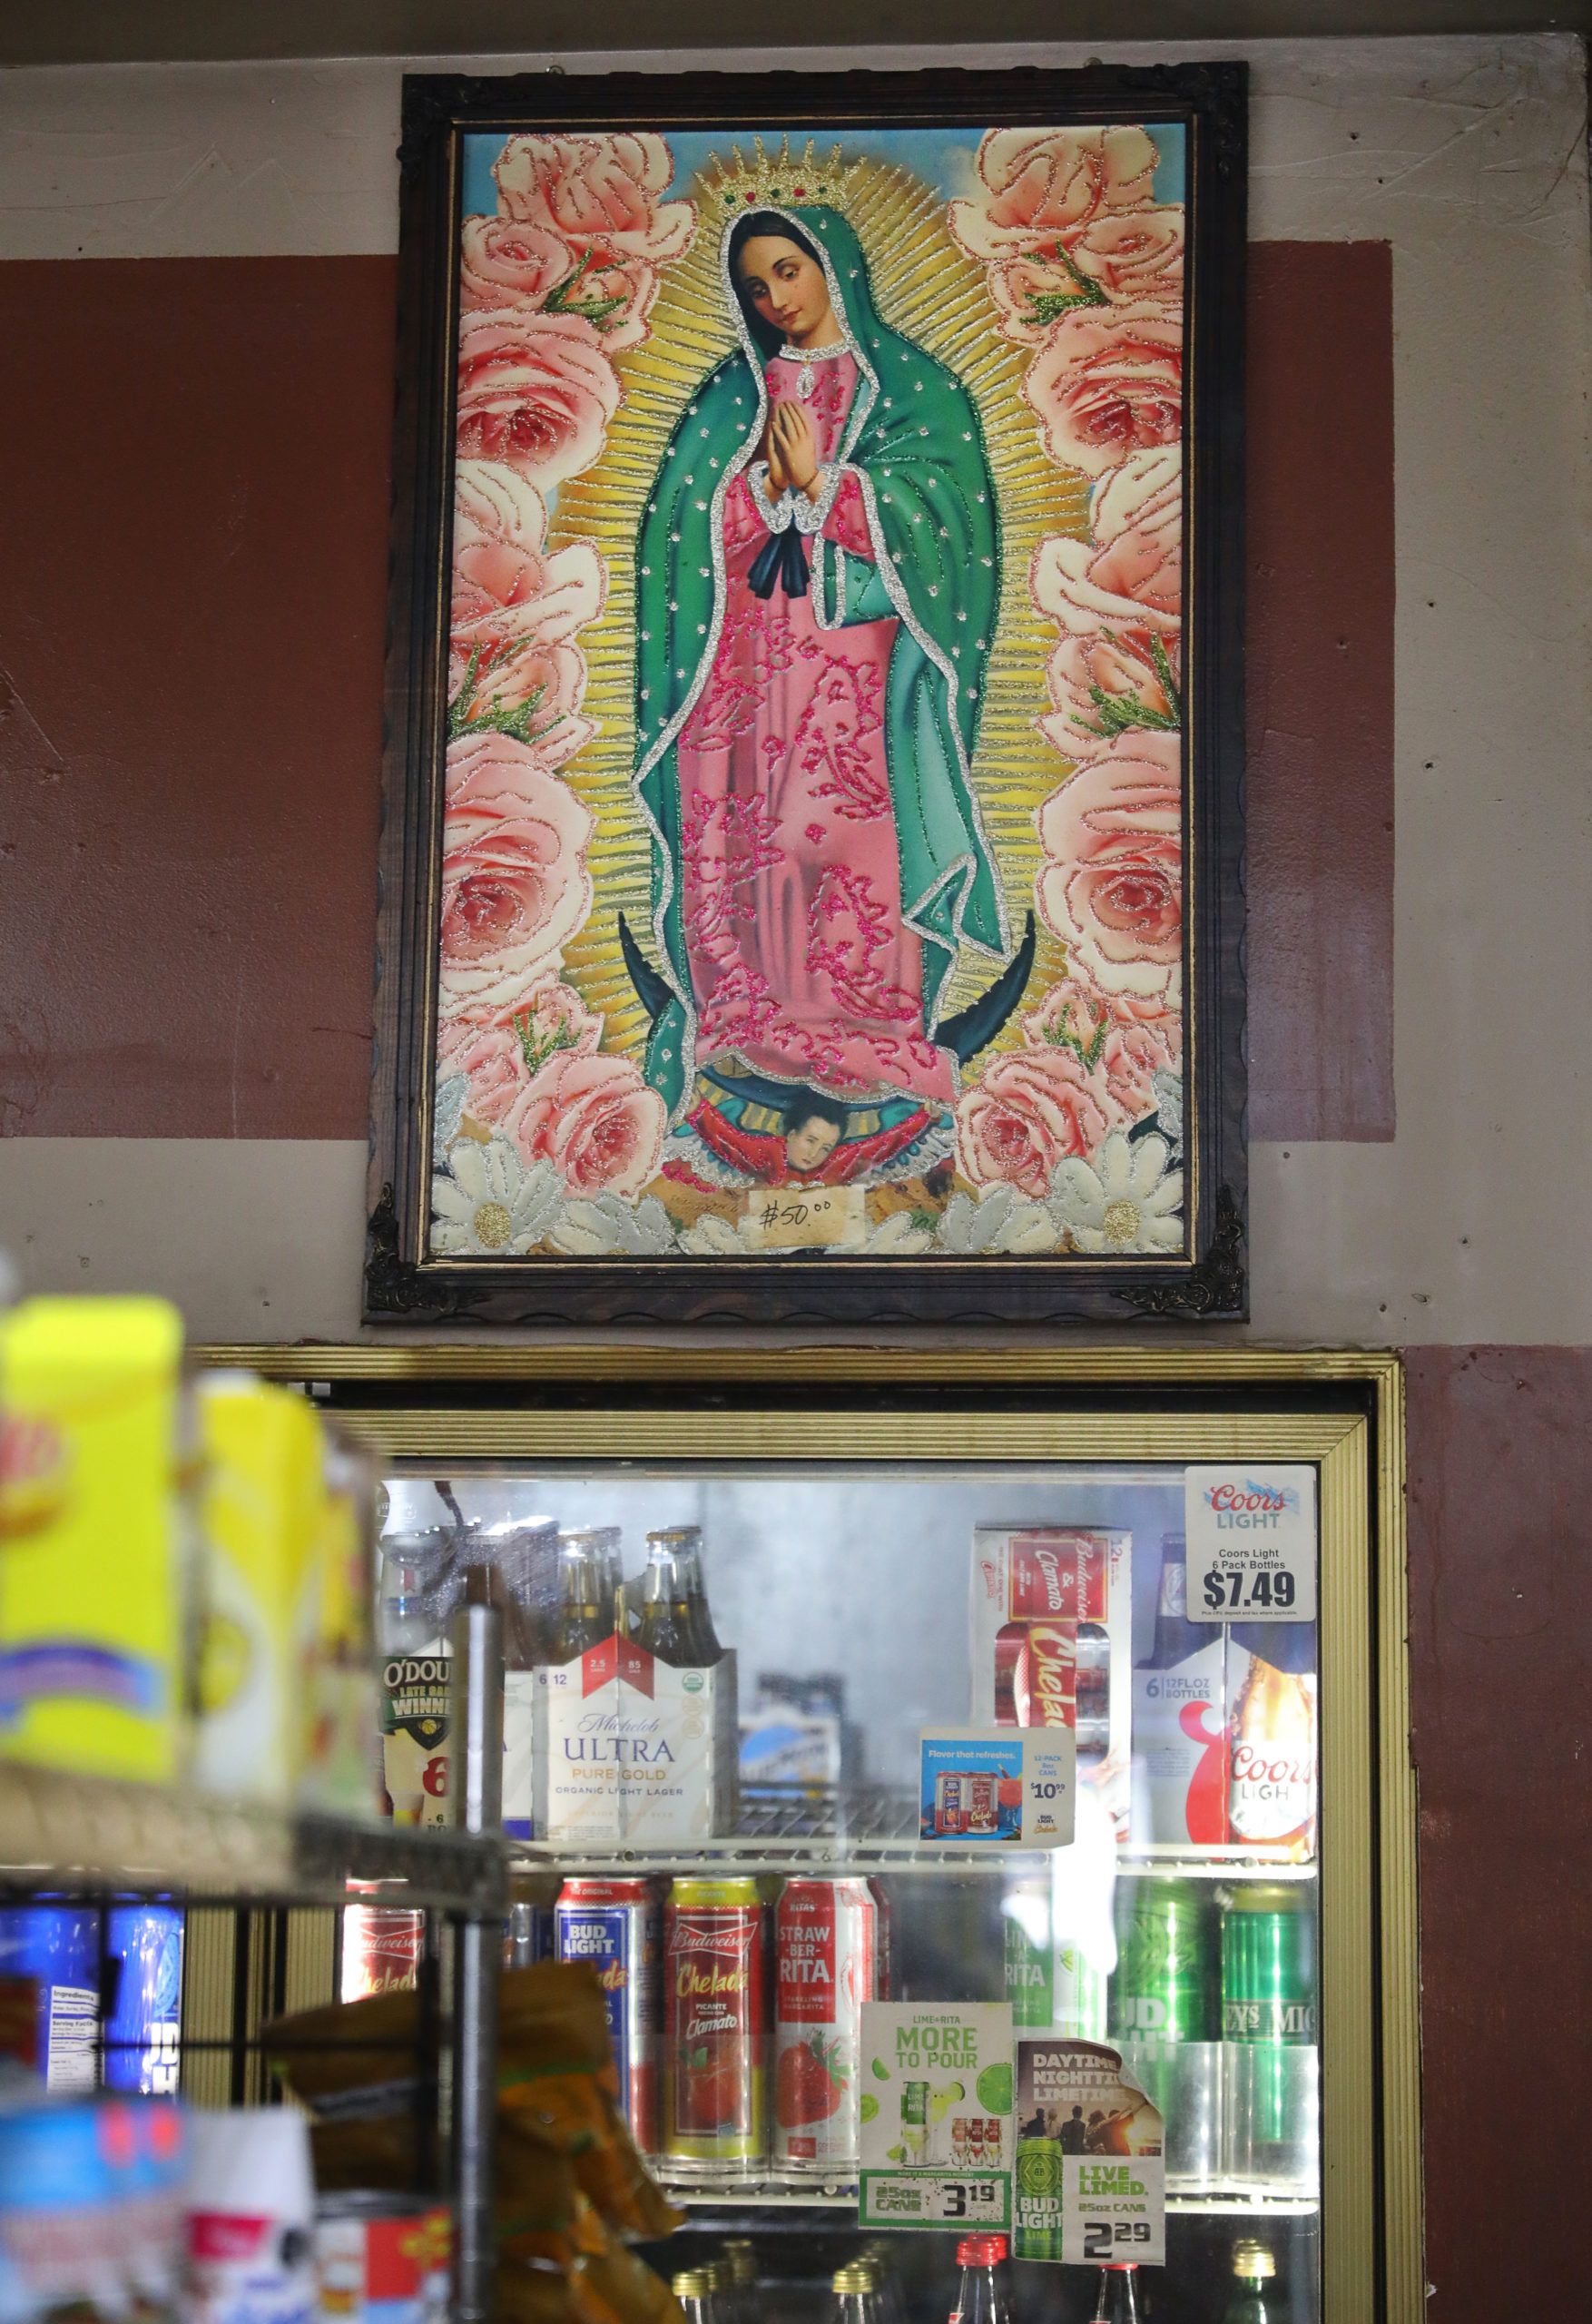 A picture of the Virgin of Guadalupe hangs on a back wall of the El Brinquito Market in Boyes Hot Springs. (Christopher Chung/ The Press Democrat)